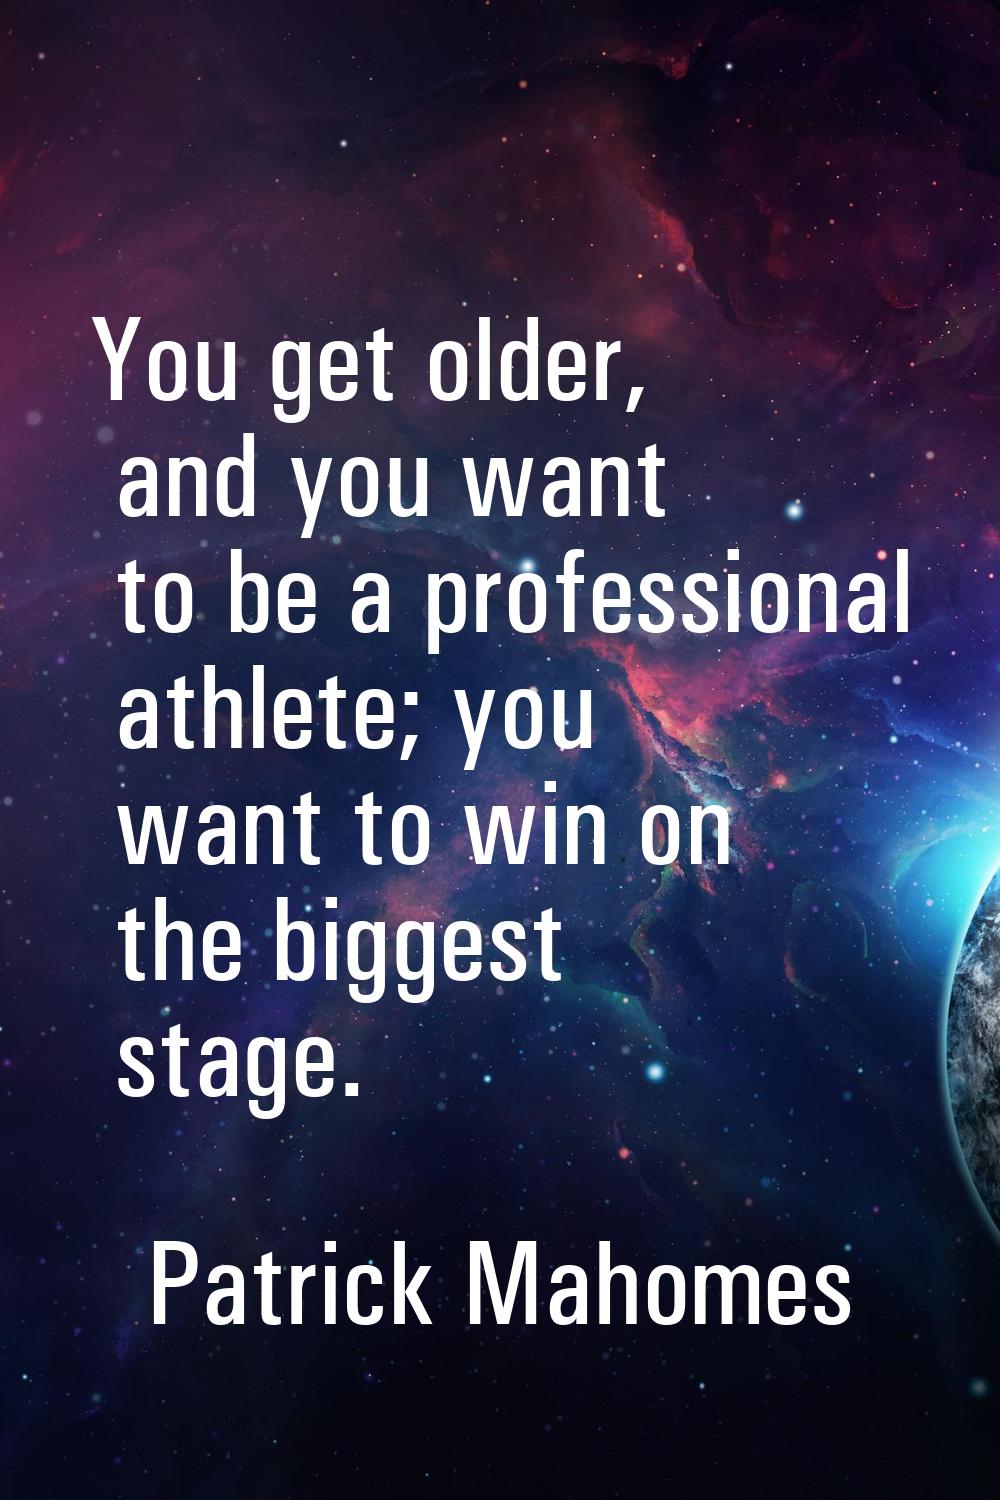 You get older, and you want to be a professional athlete; you want to win on the biggest stage.